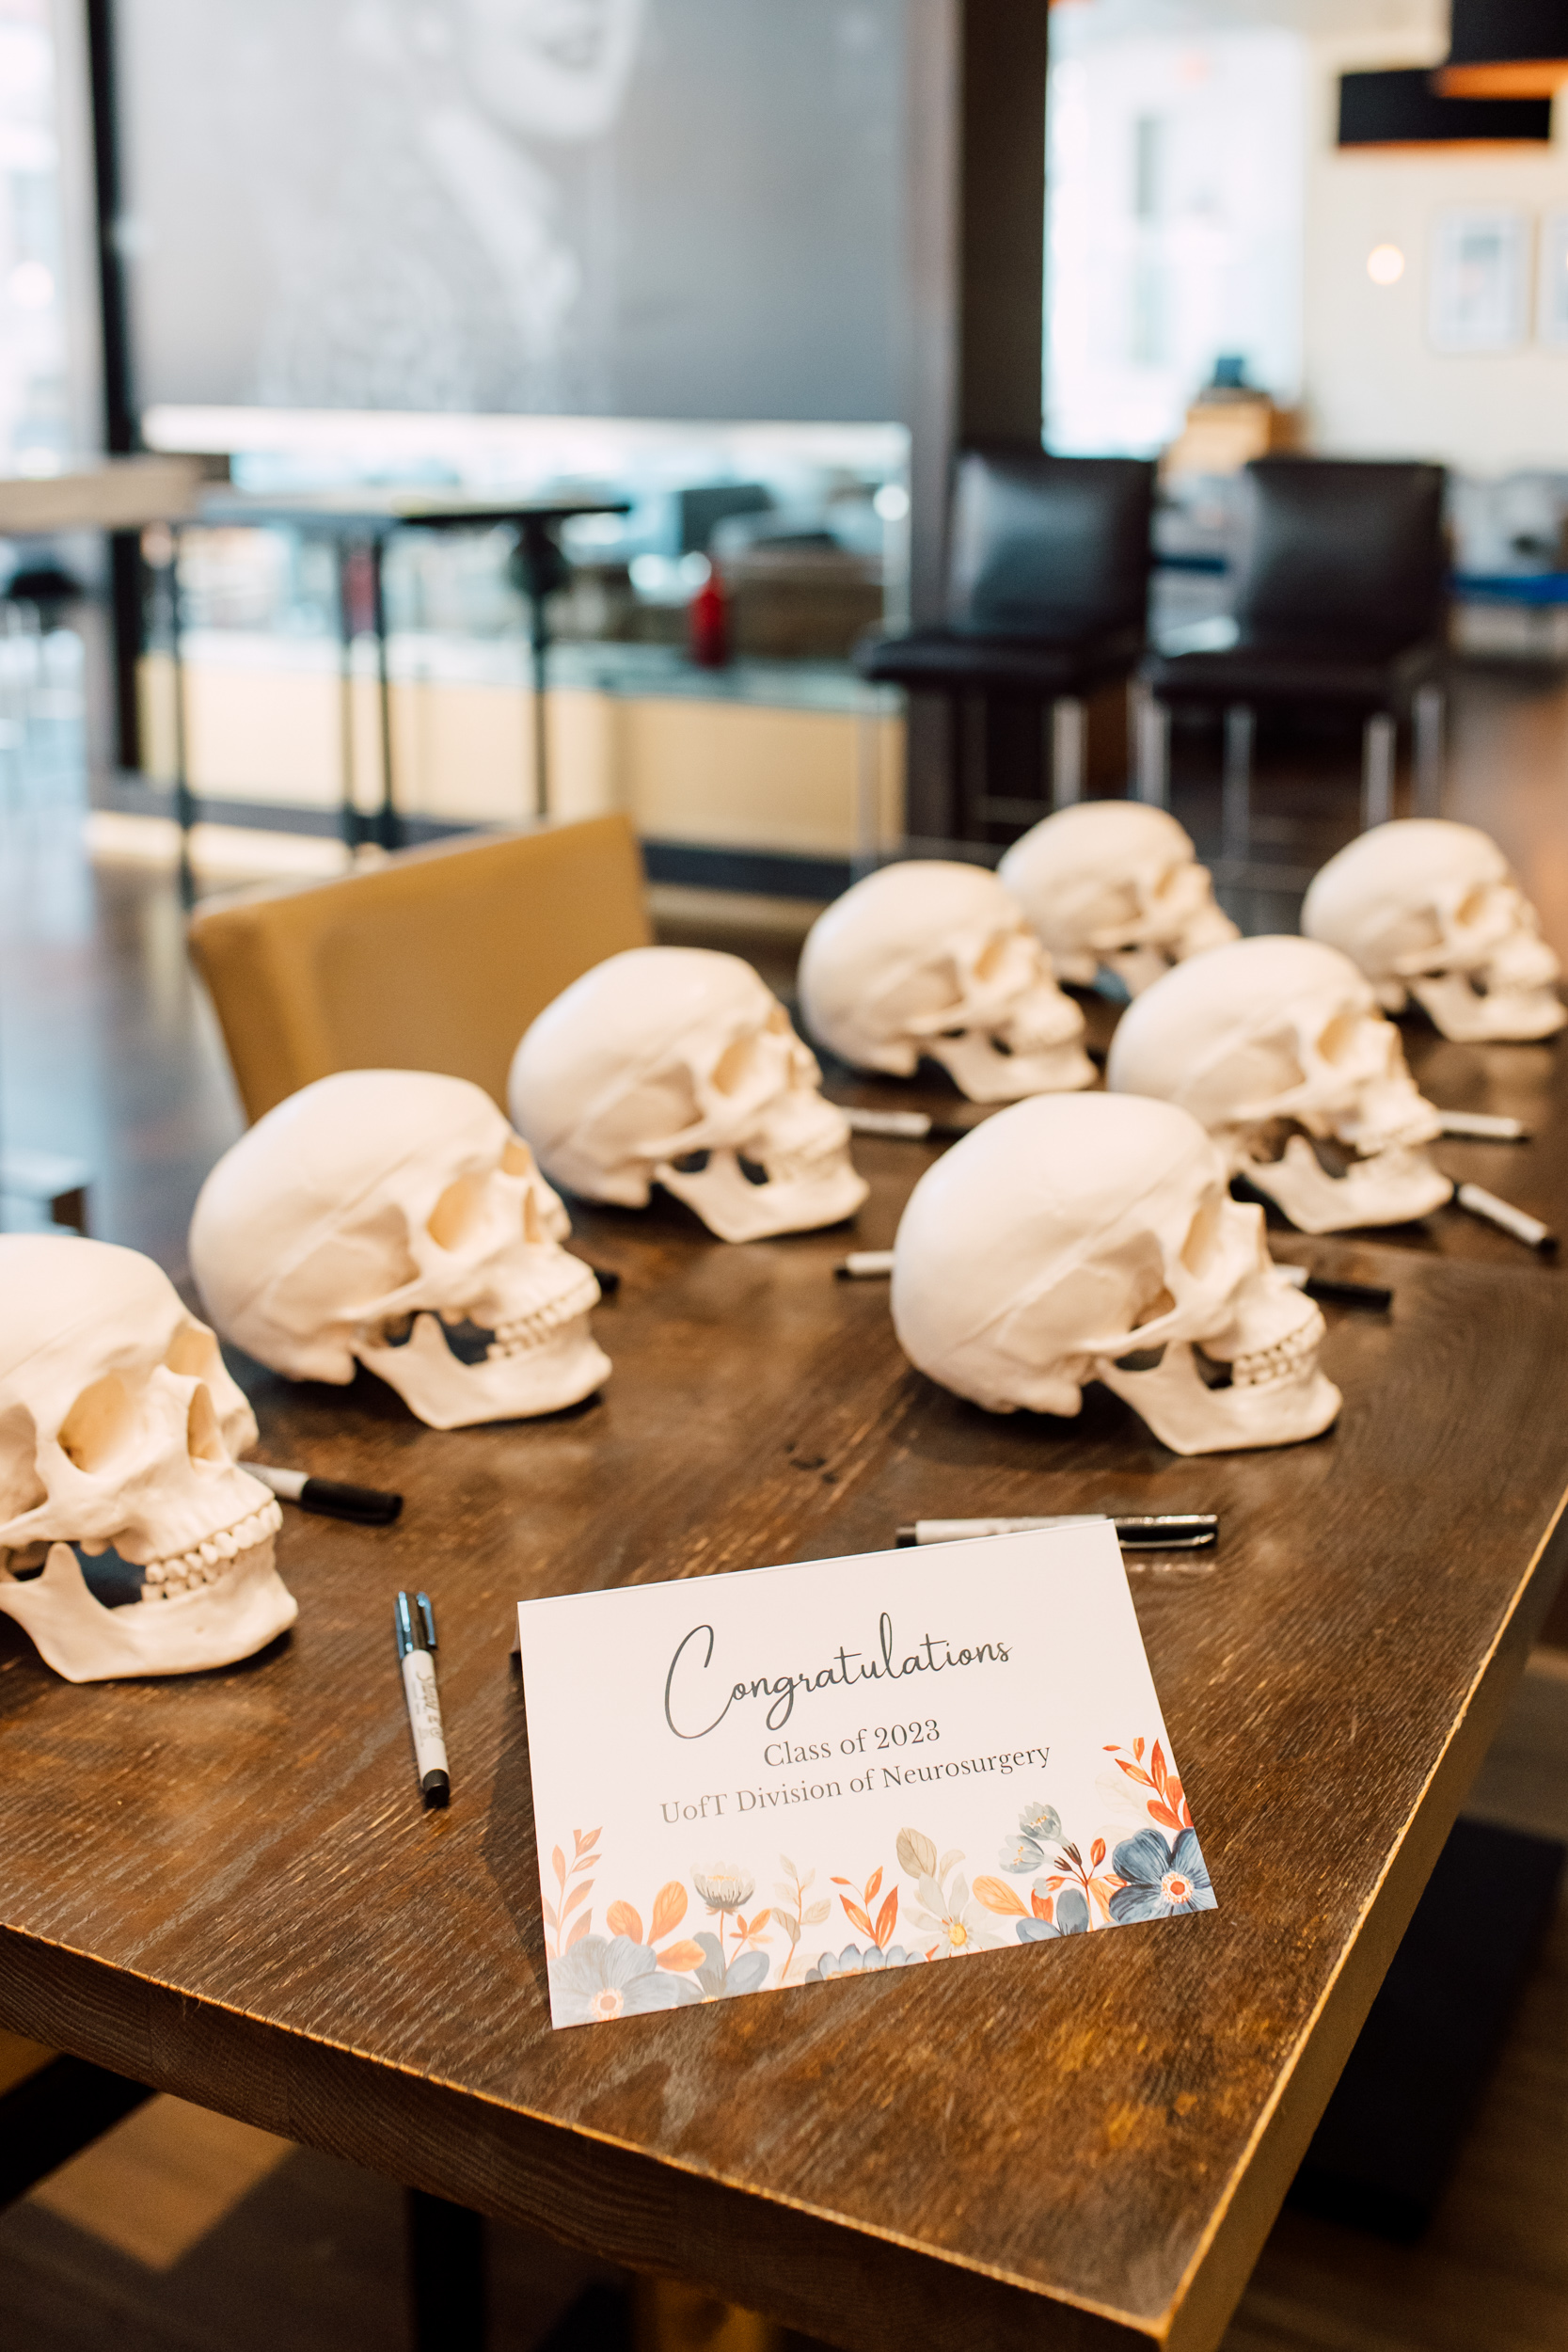 A group of graduation skulls on a table with a sign on it.